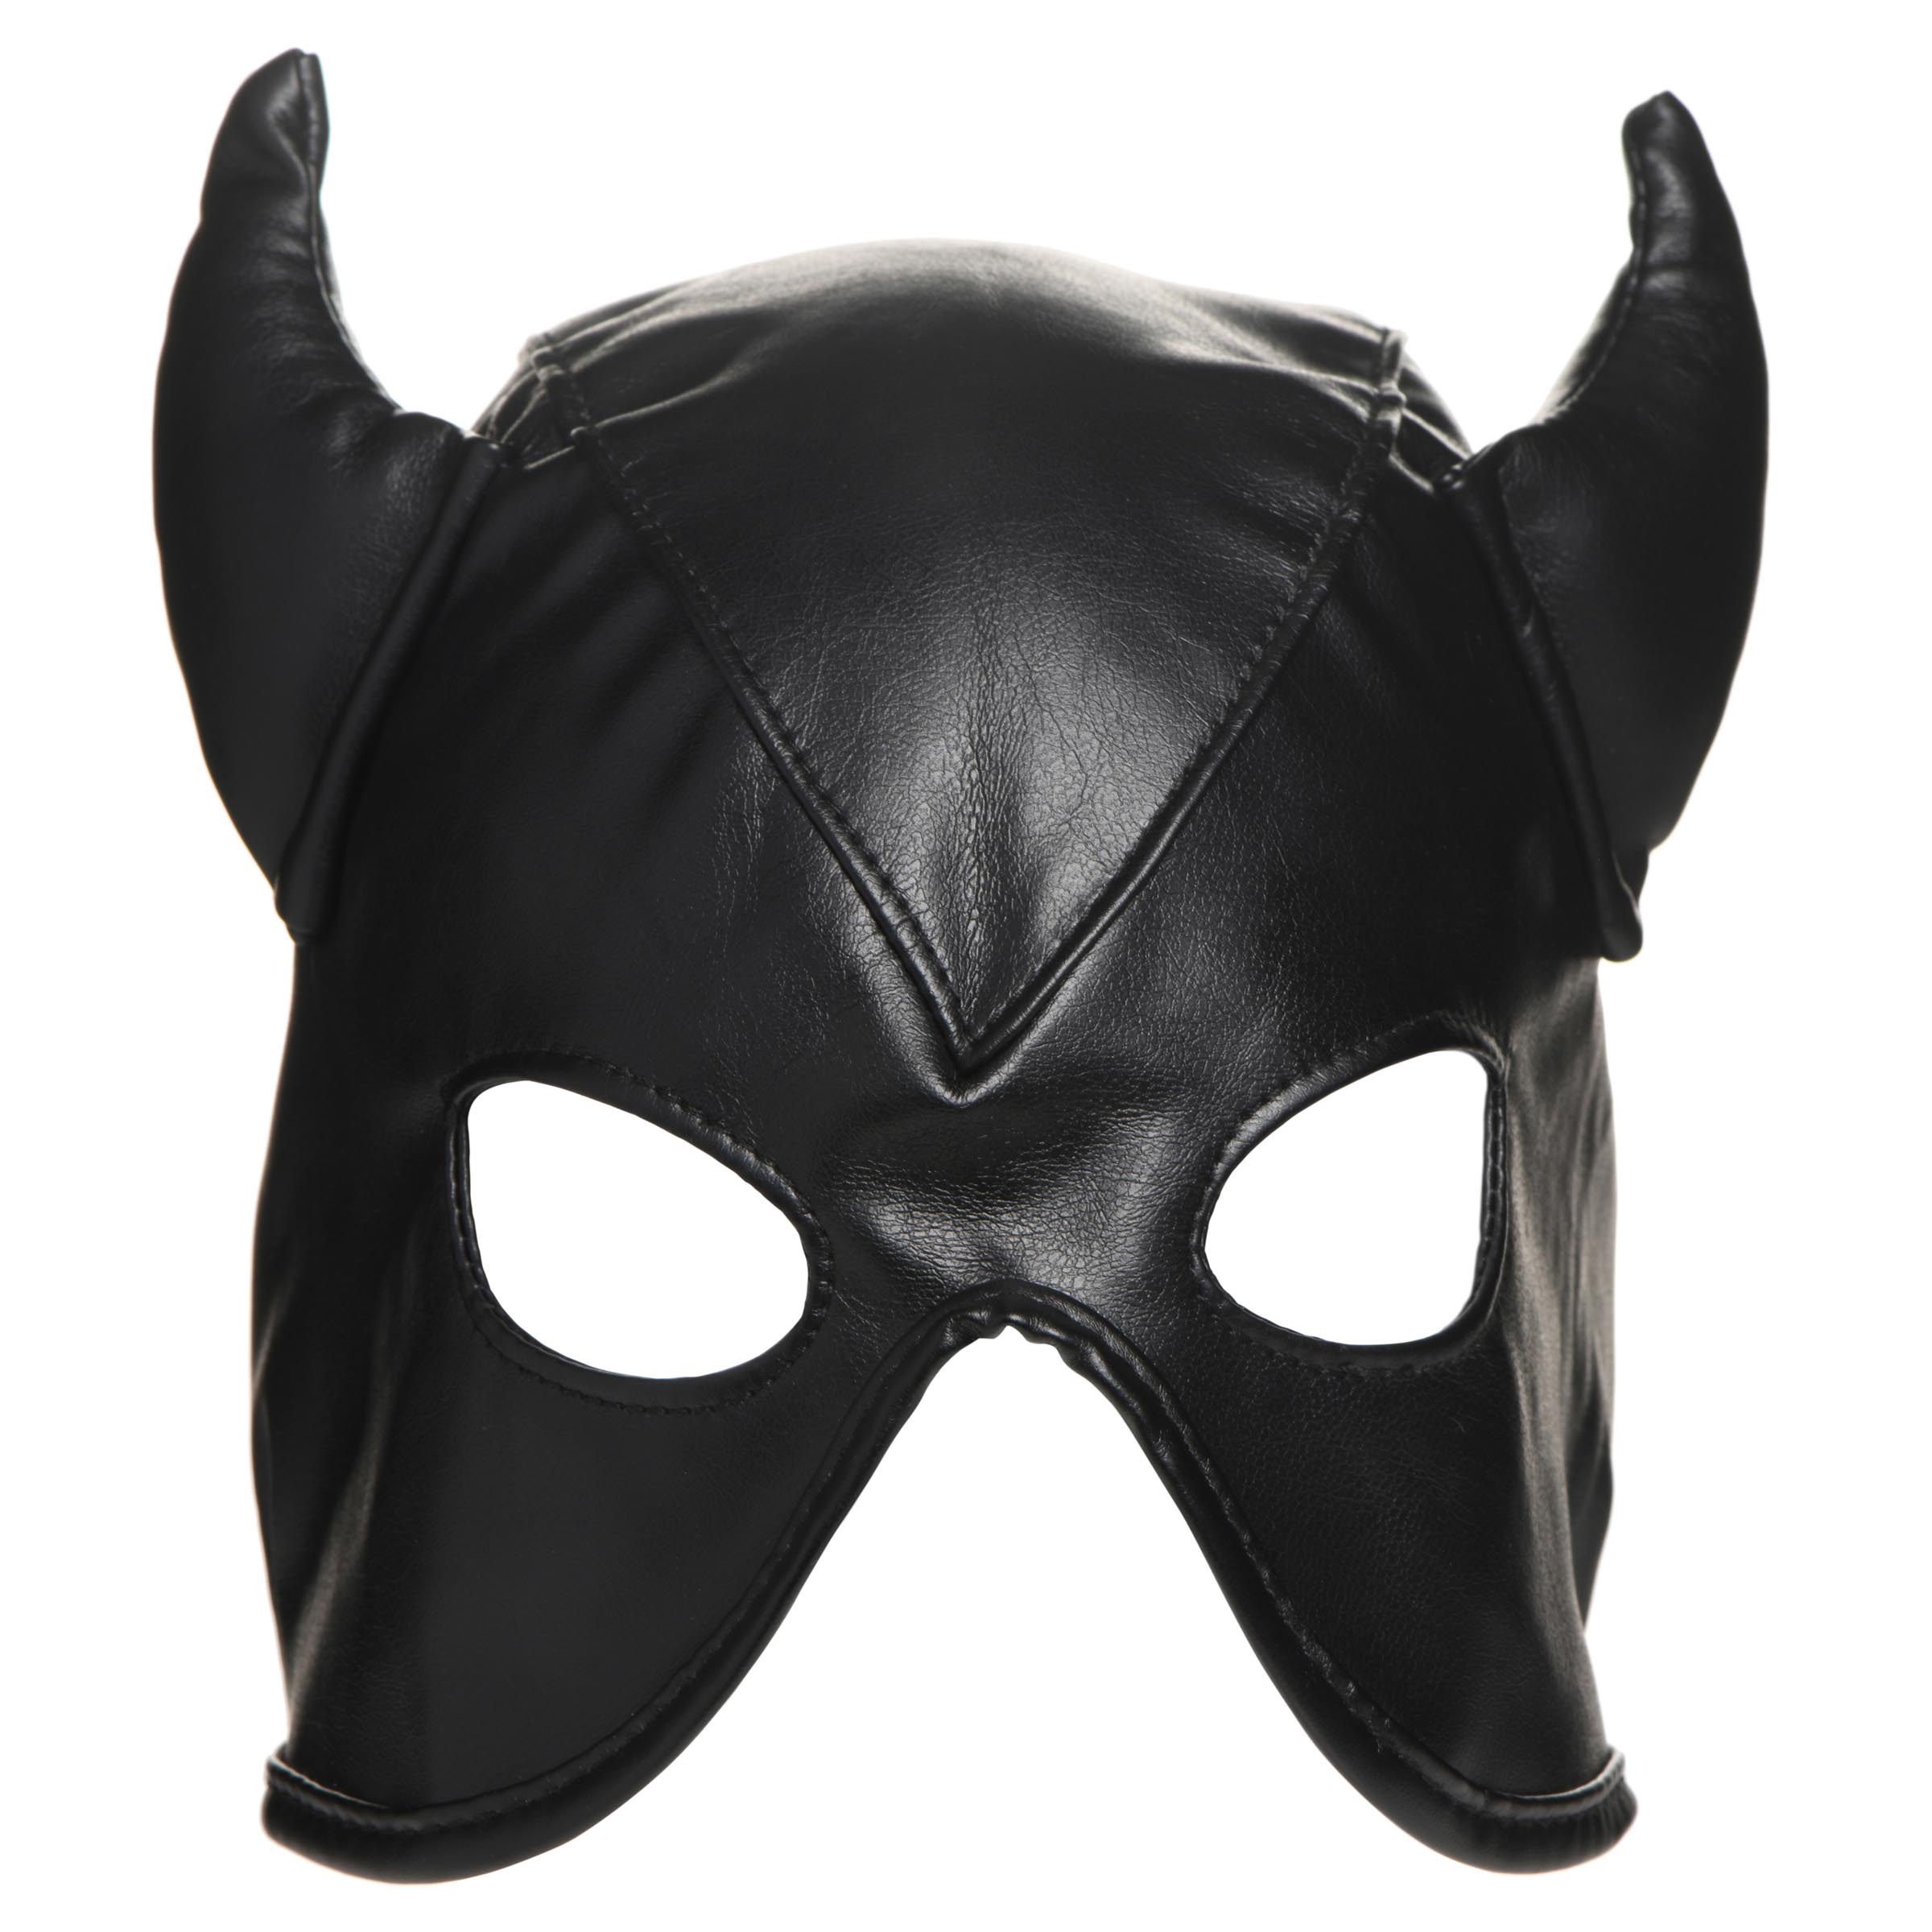 Fetish Hood with Horns